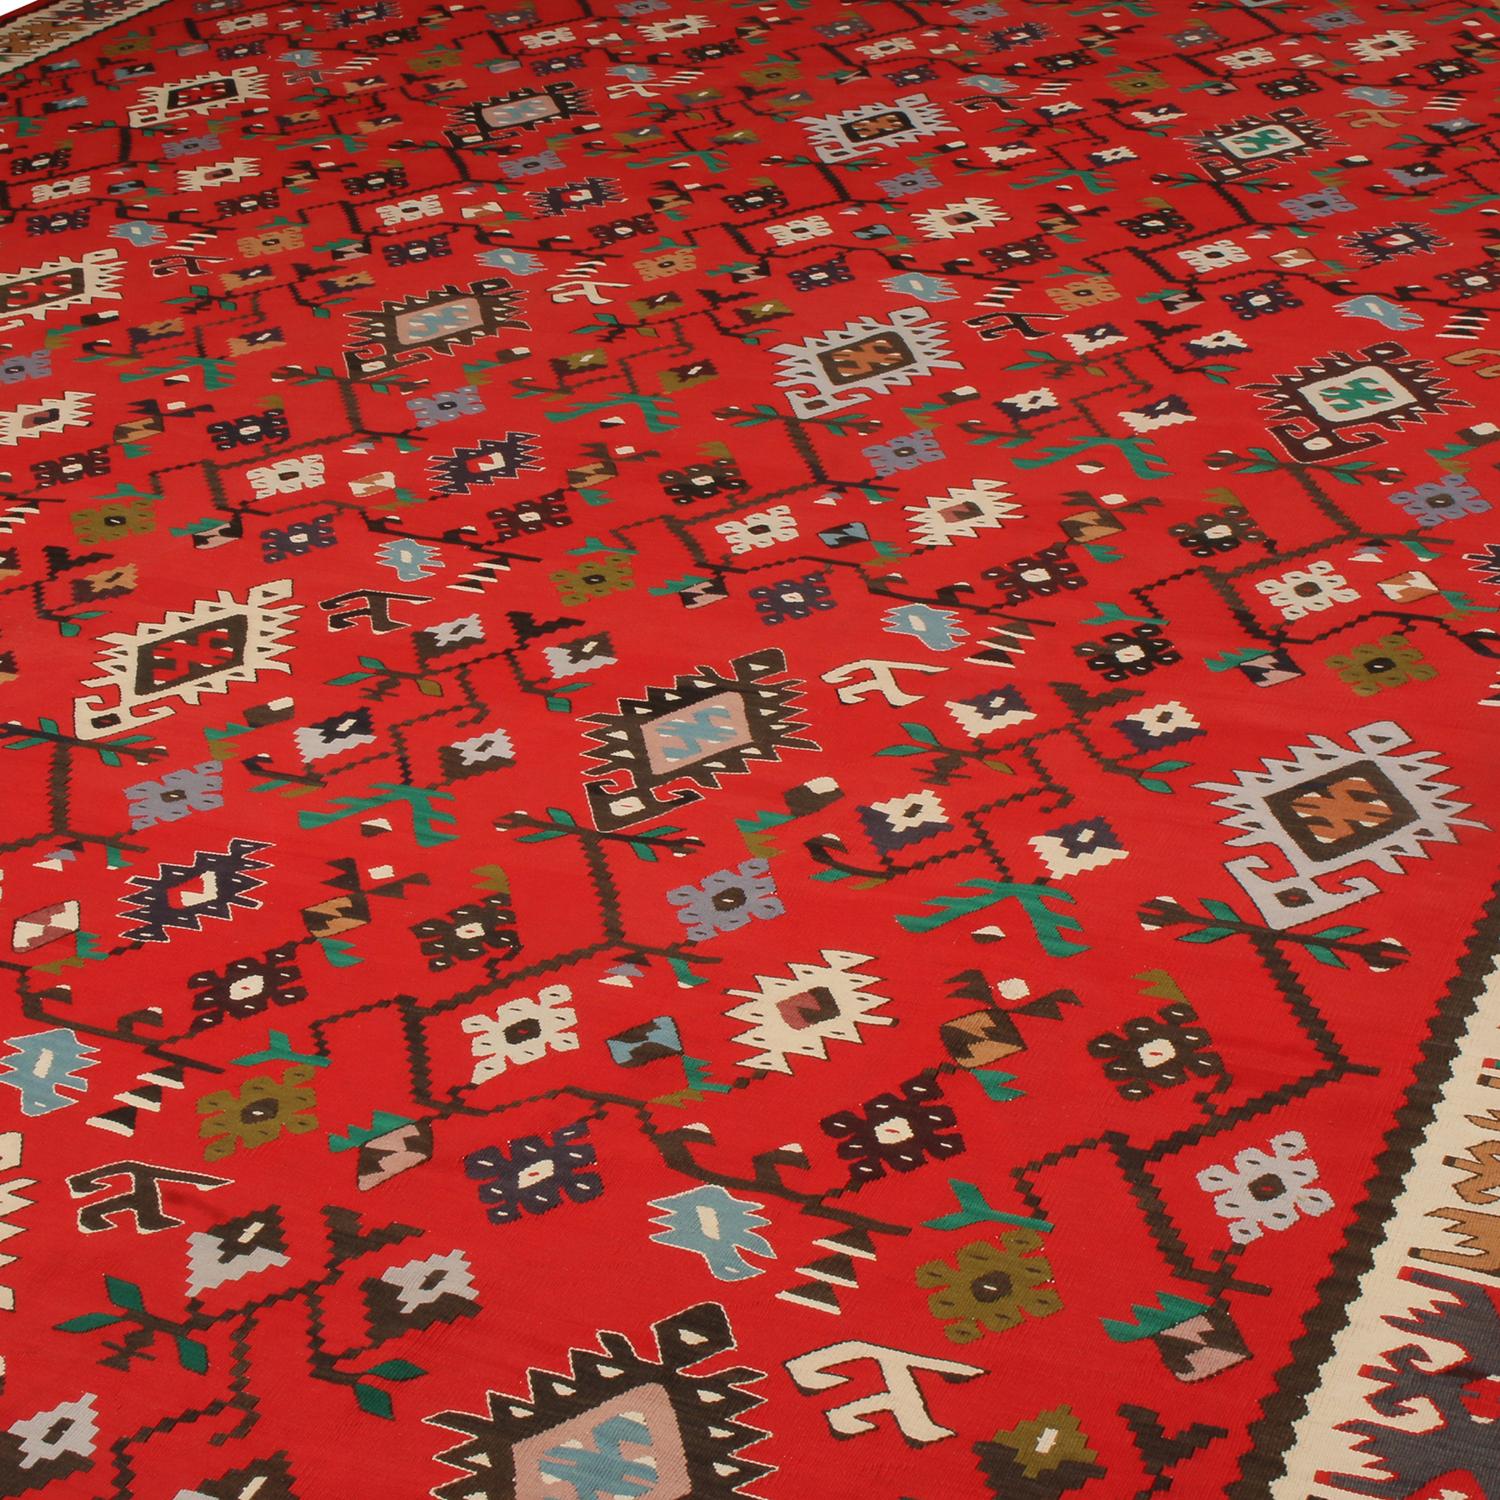 More than 80 years old originating from Turkey, between 1920-1930, this antique Kilim rug hosts an exquisite, balanced medley of spectral and pastel colorways with its rich red background. Flat-woven in high-quality wool with naturally dyed yarn in